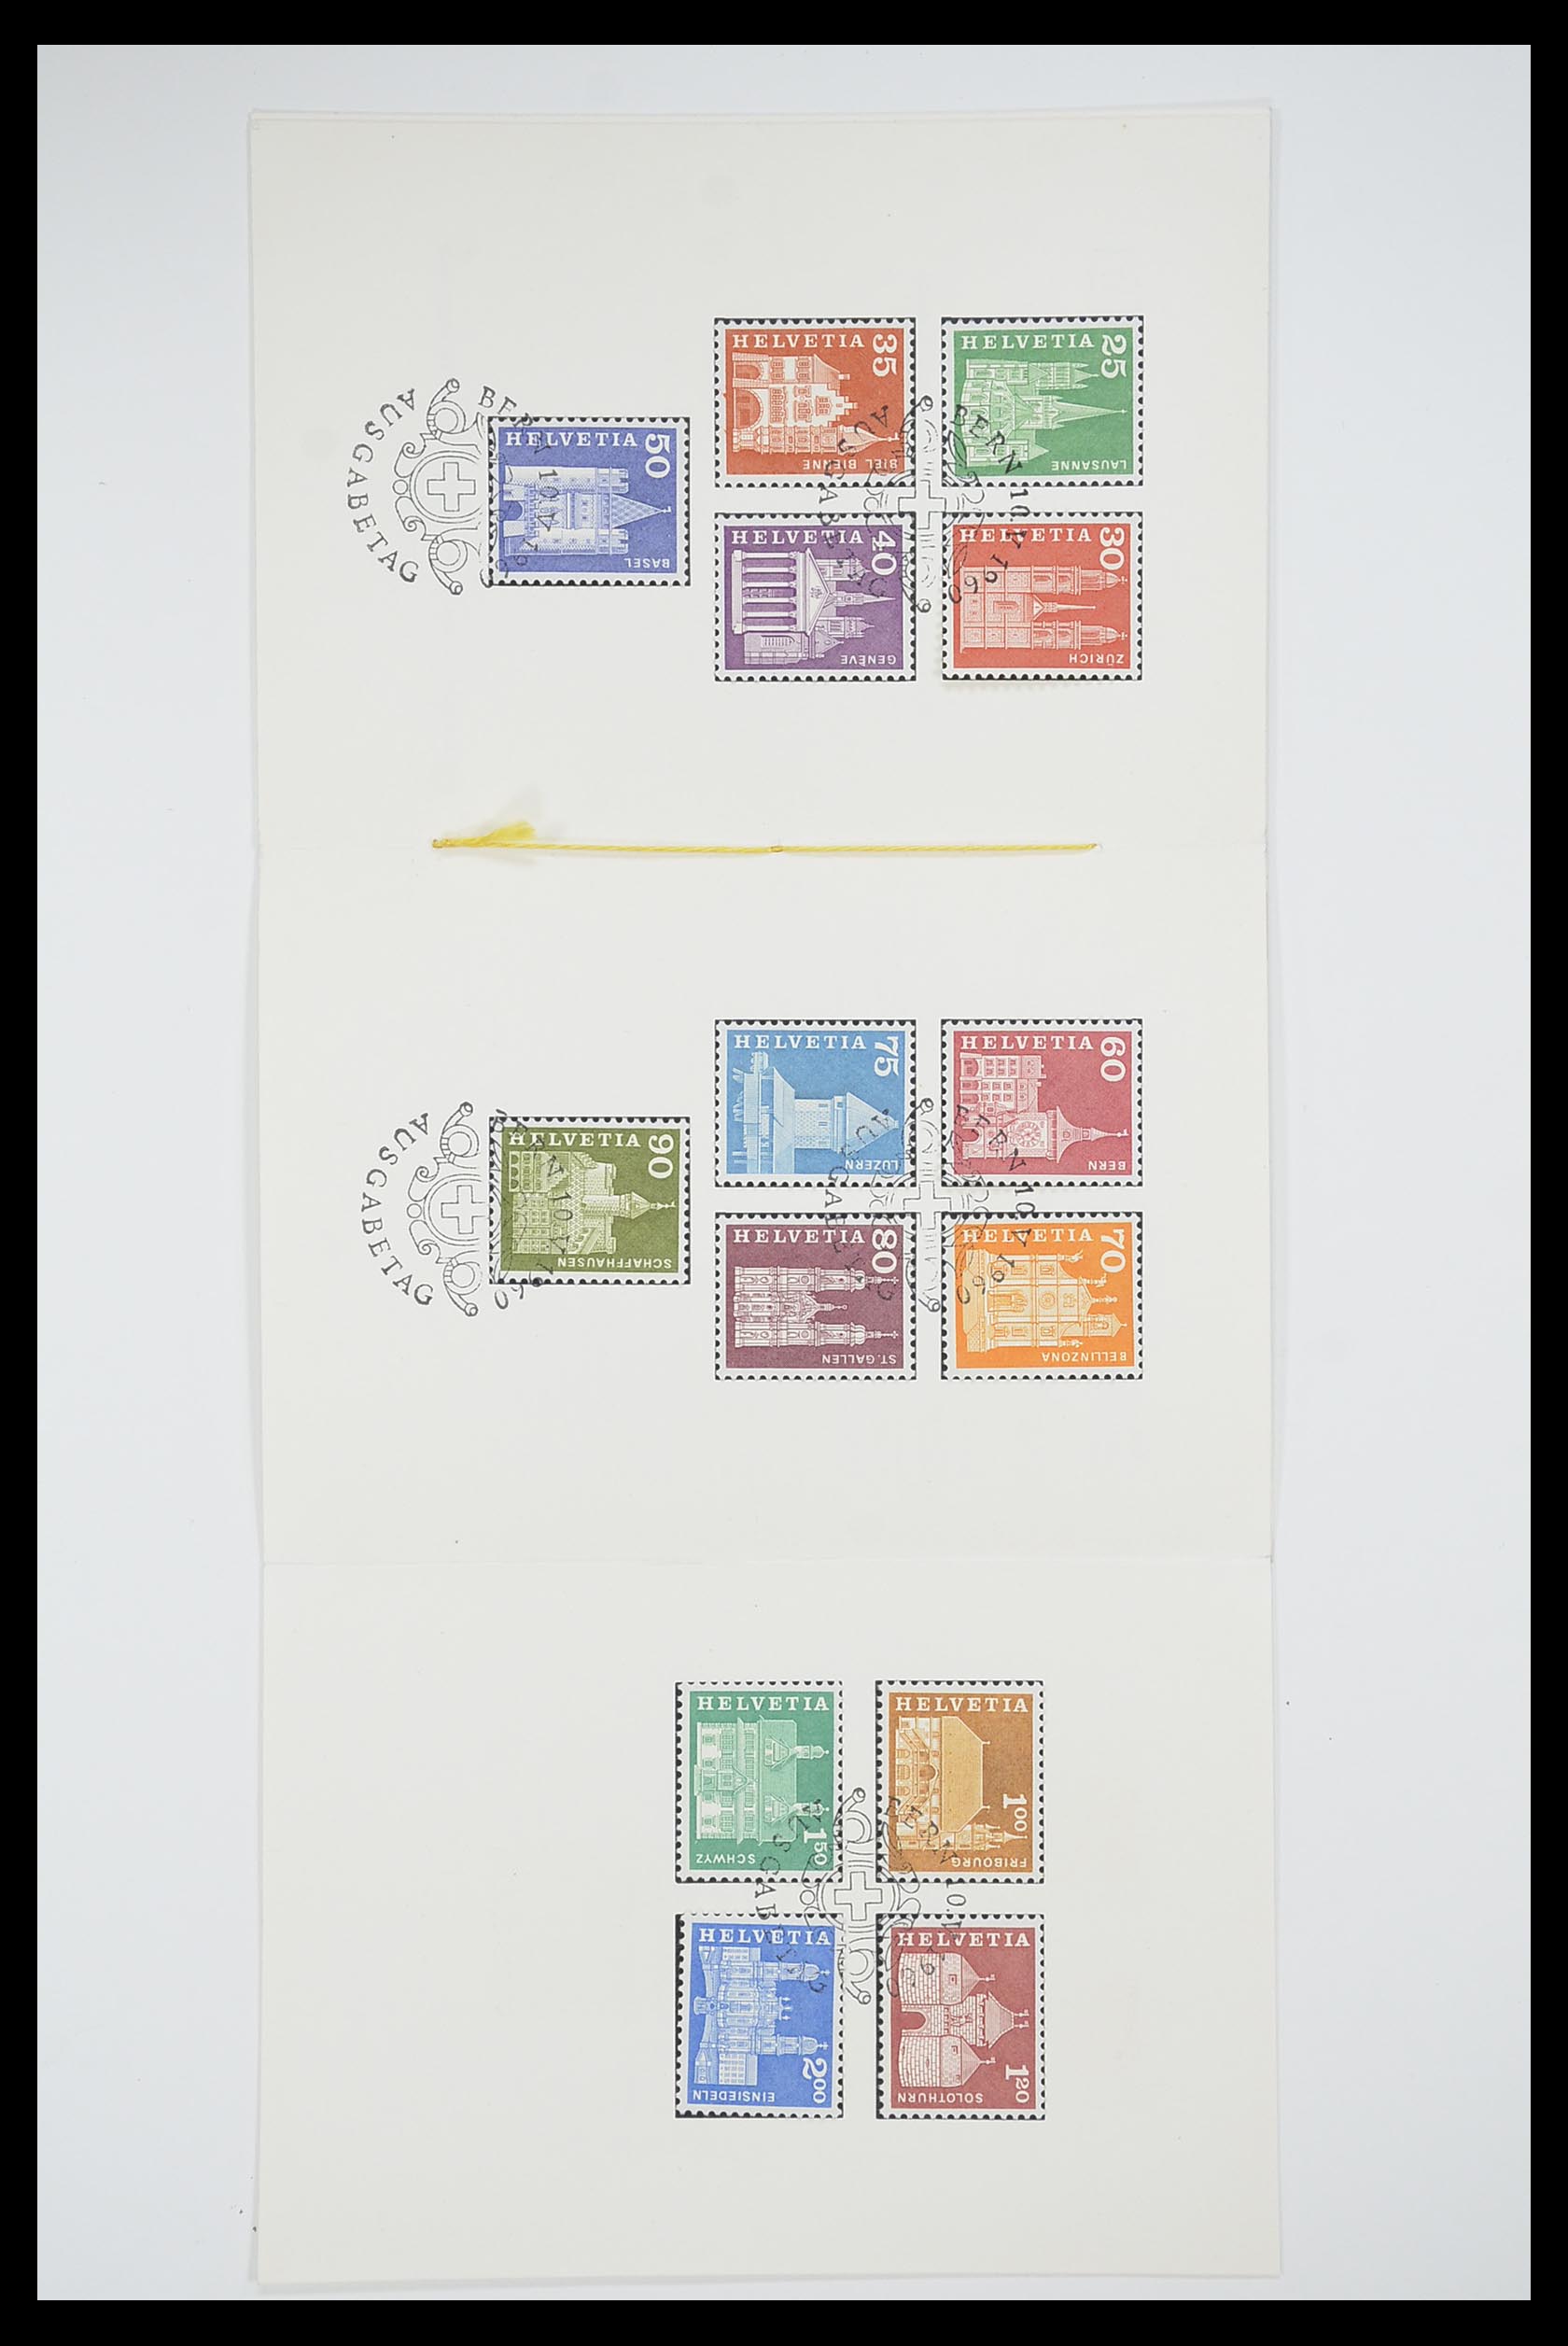 33284 032 - Stamp collection 33284 Switzerland better issues 1900-1995.